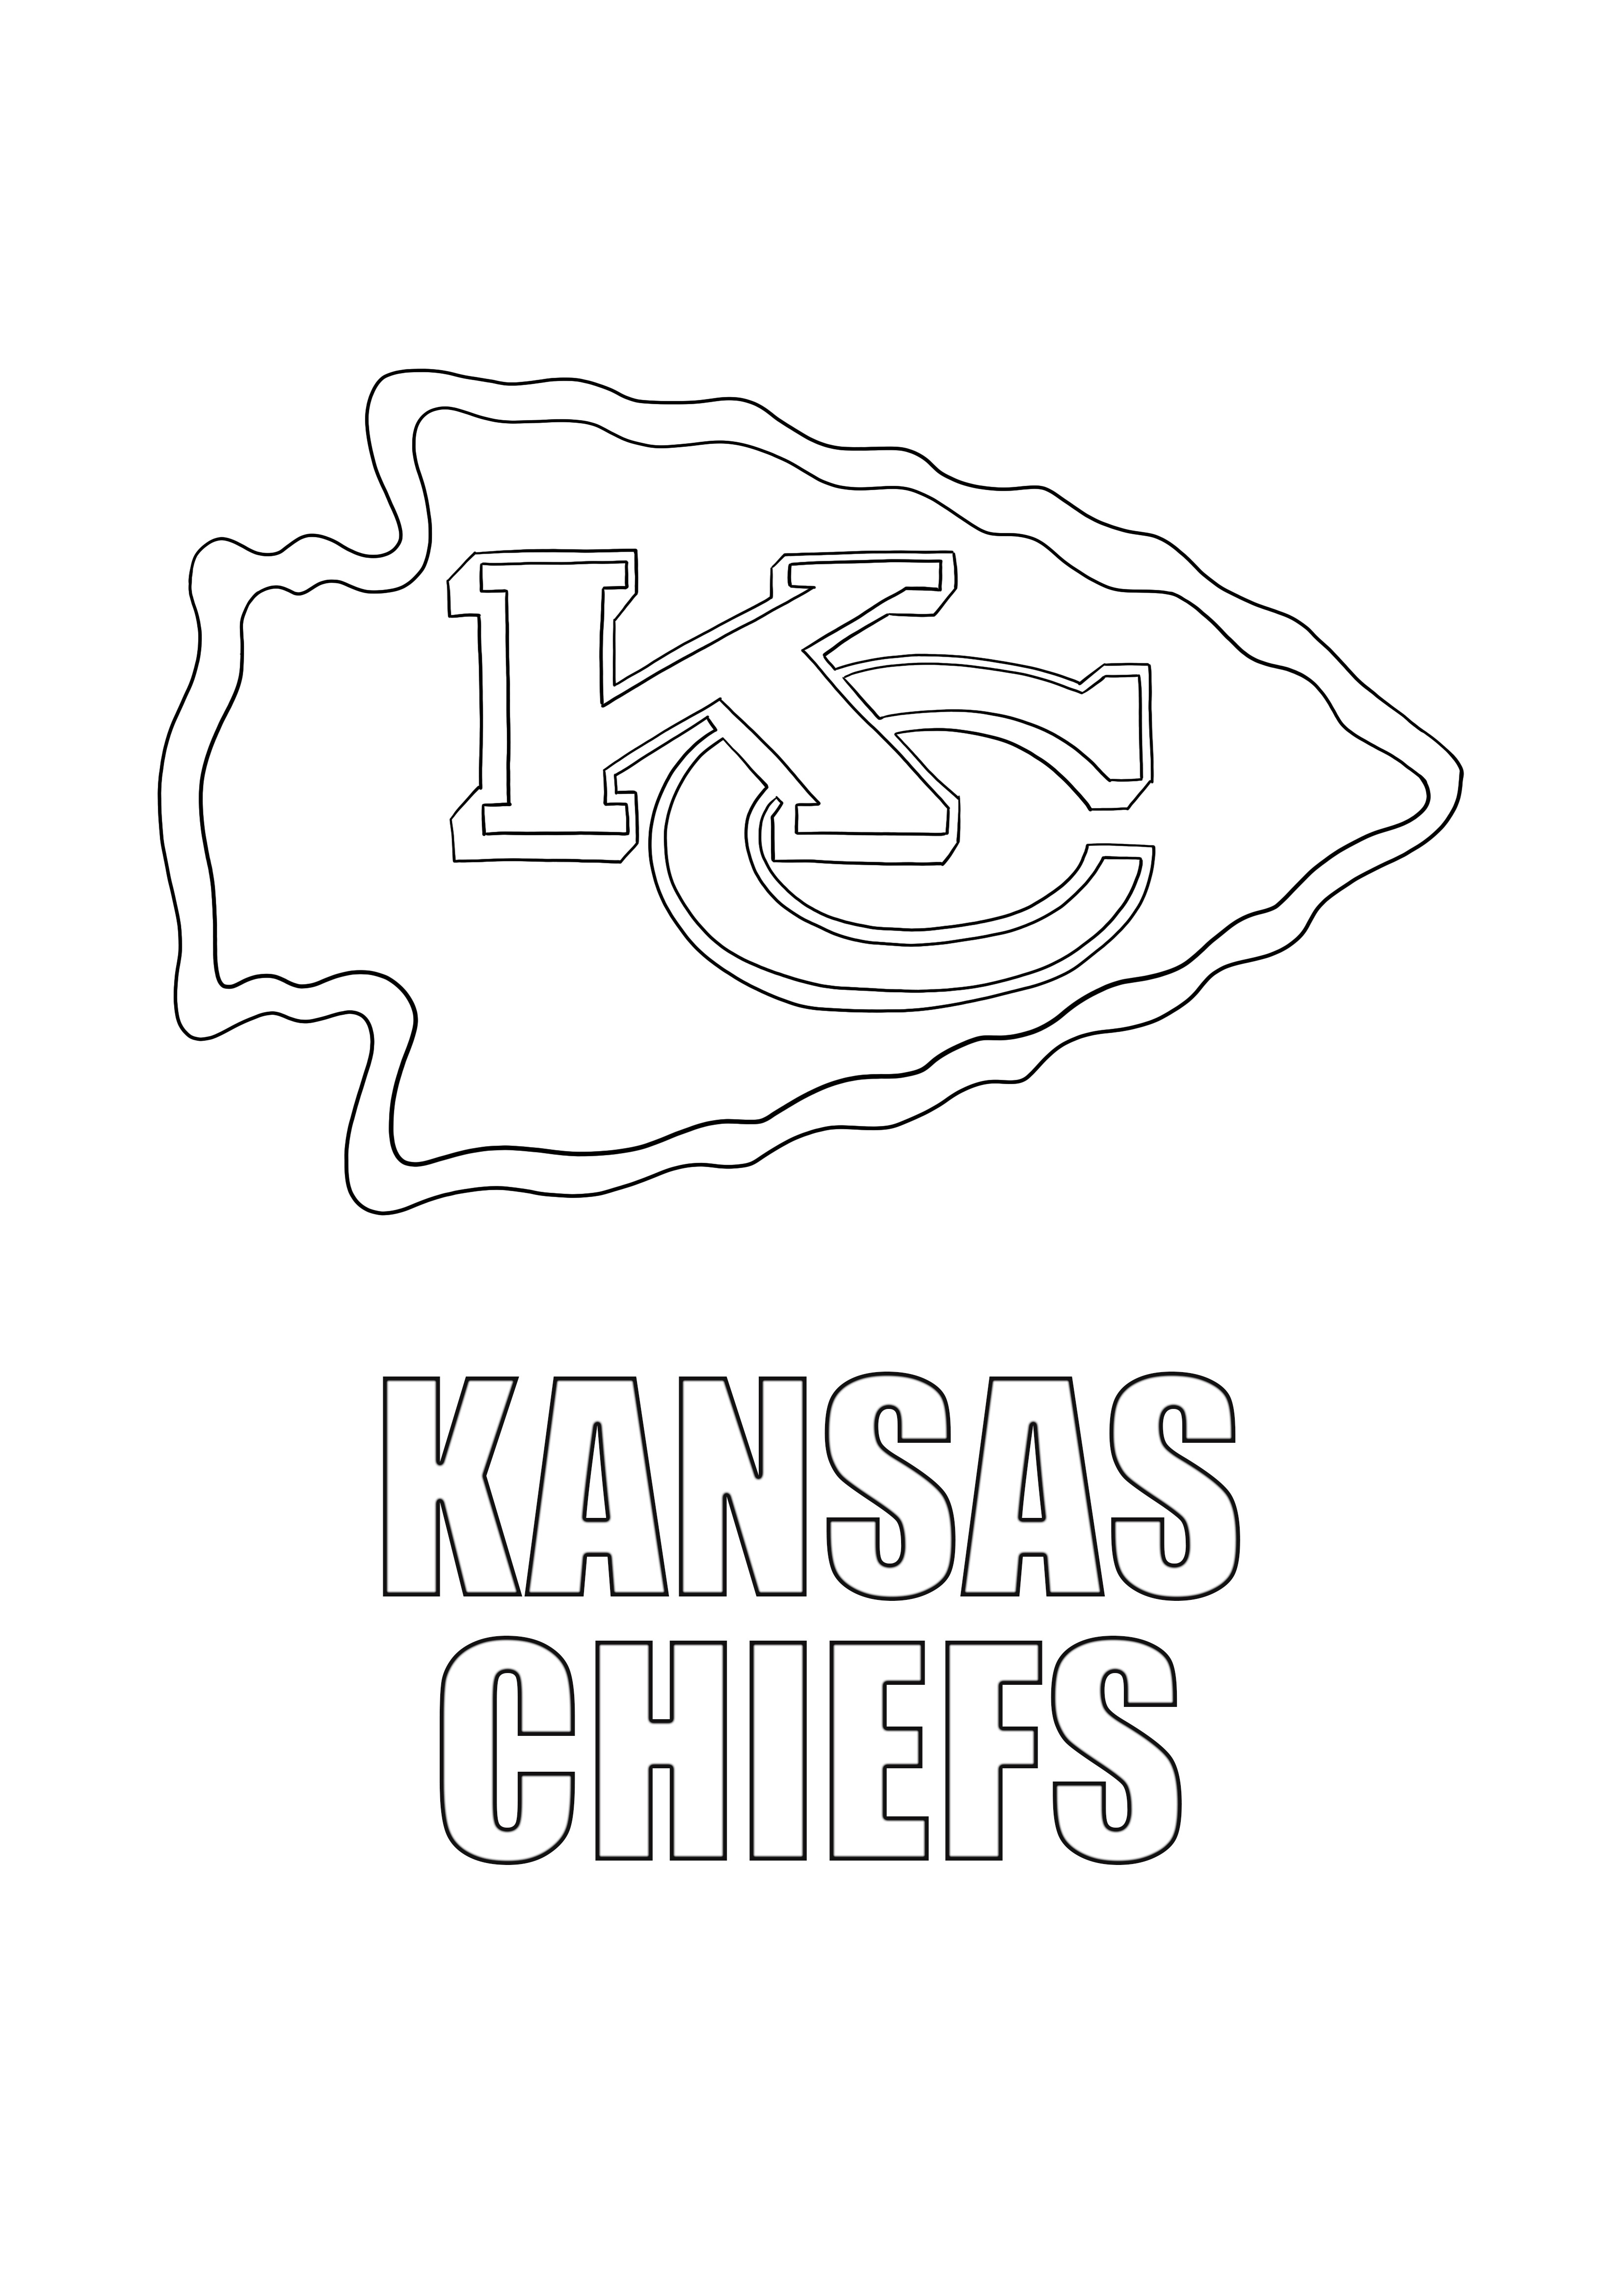 Kansas chiefs coloring and free ...